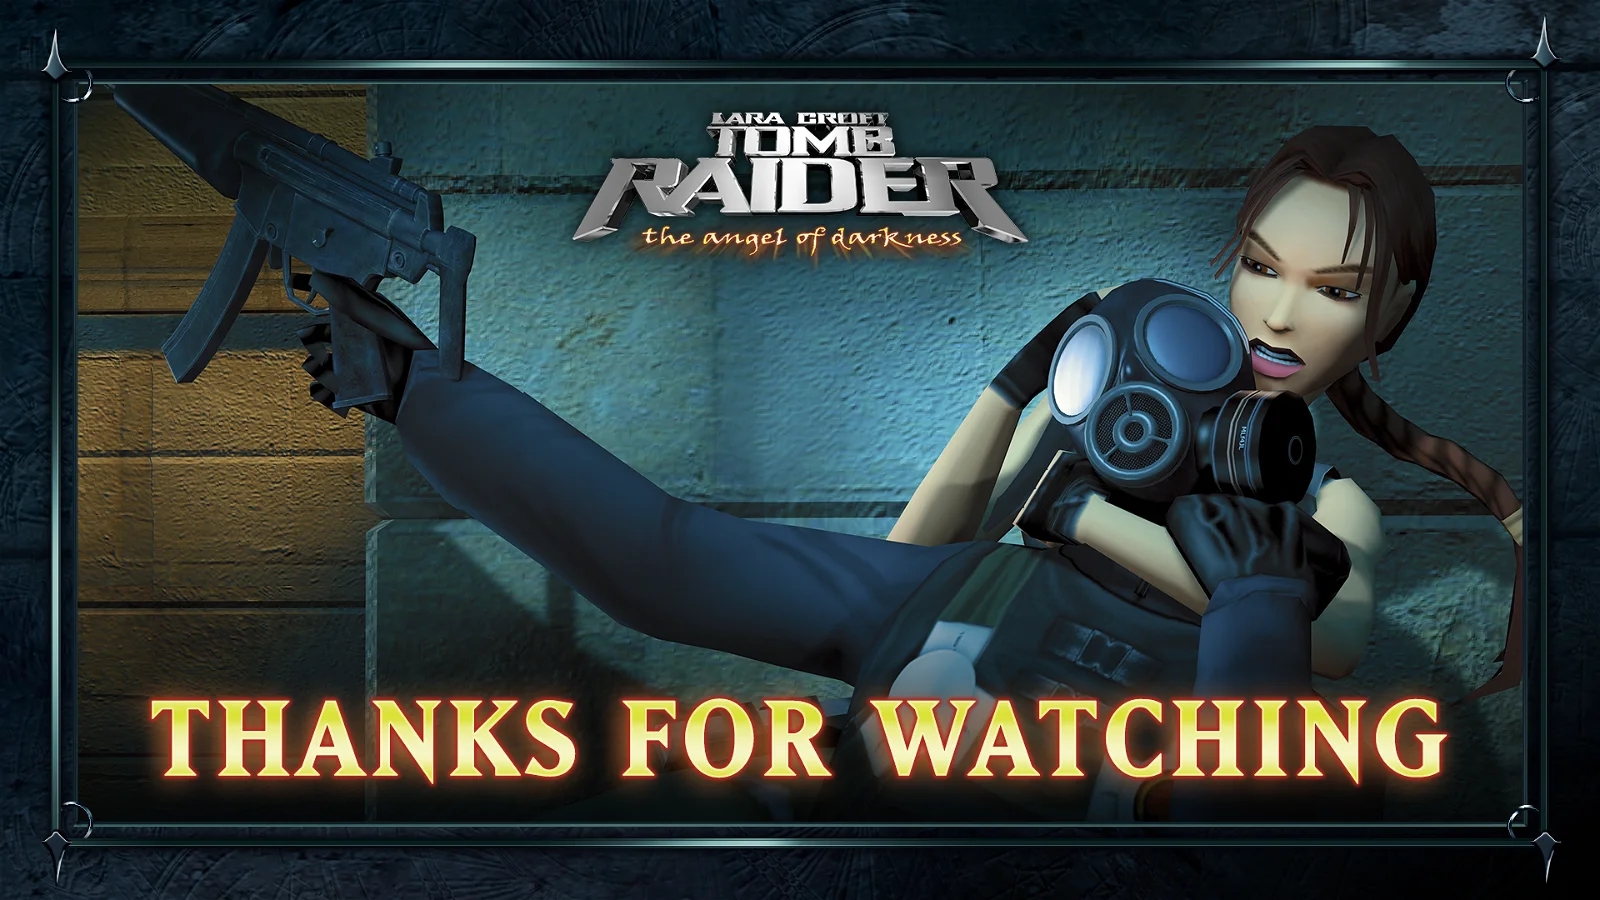 A streaming end screen from "Tomb Raider: The Angel of Darkness" featuring Lara Croft with a gun and binoculars, with the text "THANKS FOR WATCHING."